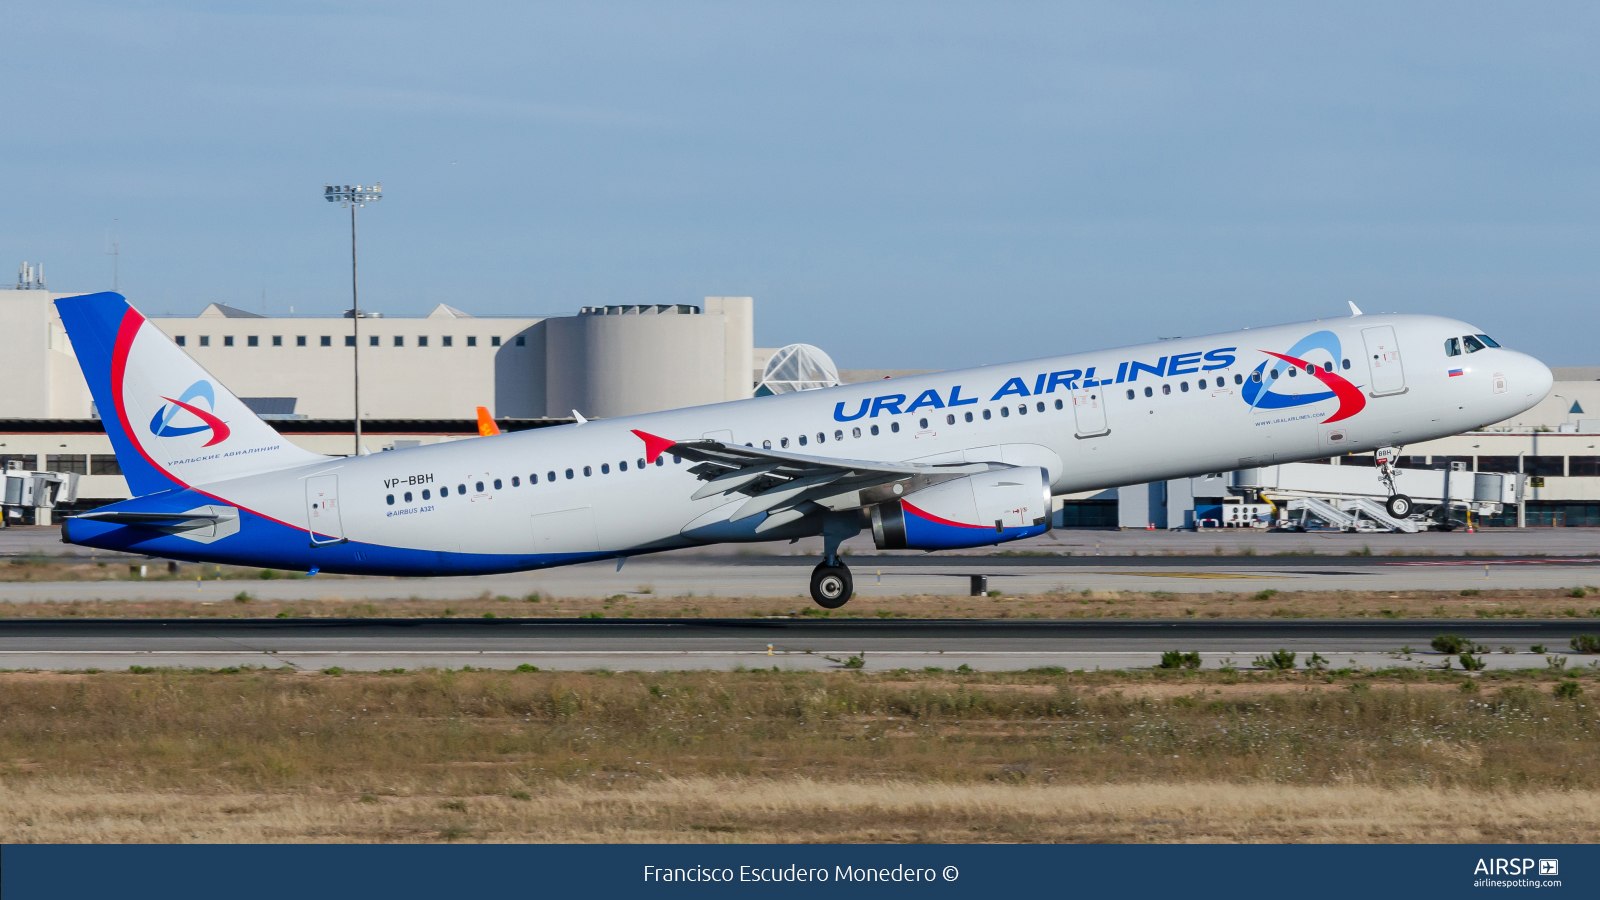 Ural Airlines  Airbus A321  VP-BBH